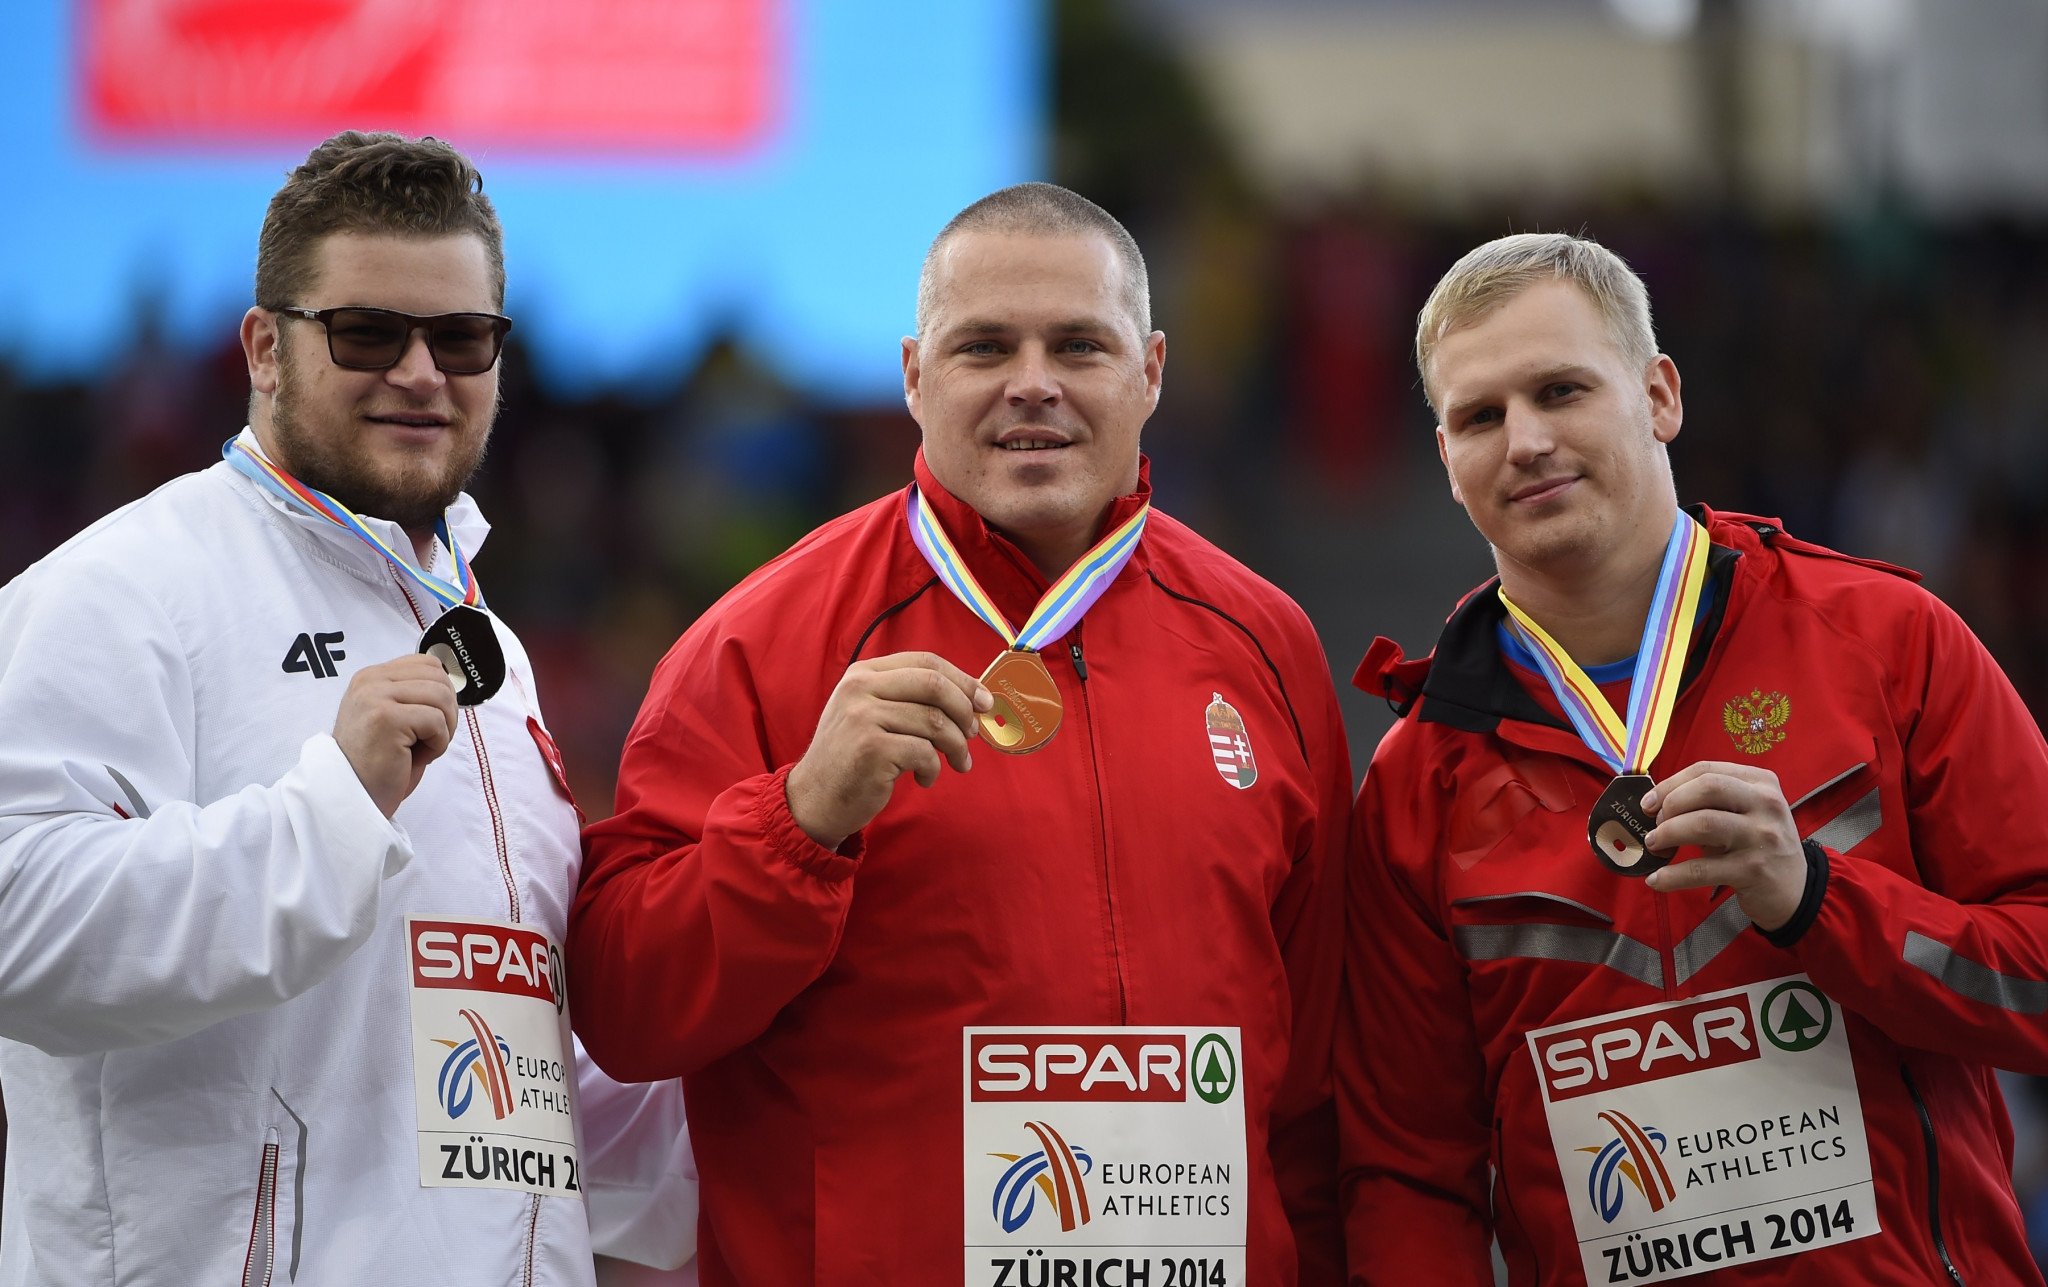 Sergey Litvinov, right, is now set to lose medals he won in the period from 2012 until 2016, including a bronze at the 2014 European Championships in Zurich ©Getty Images